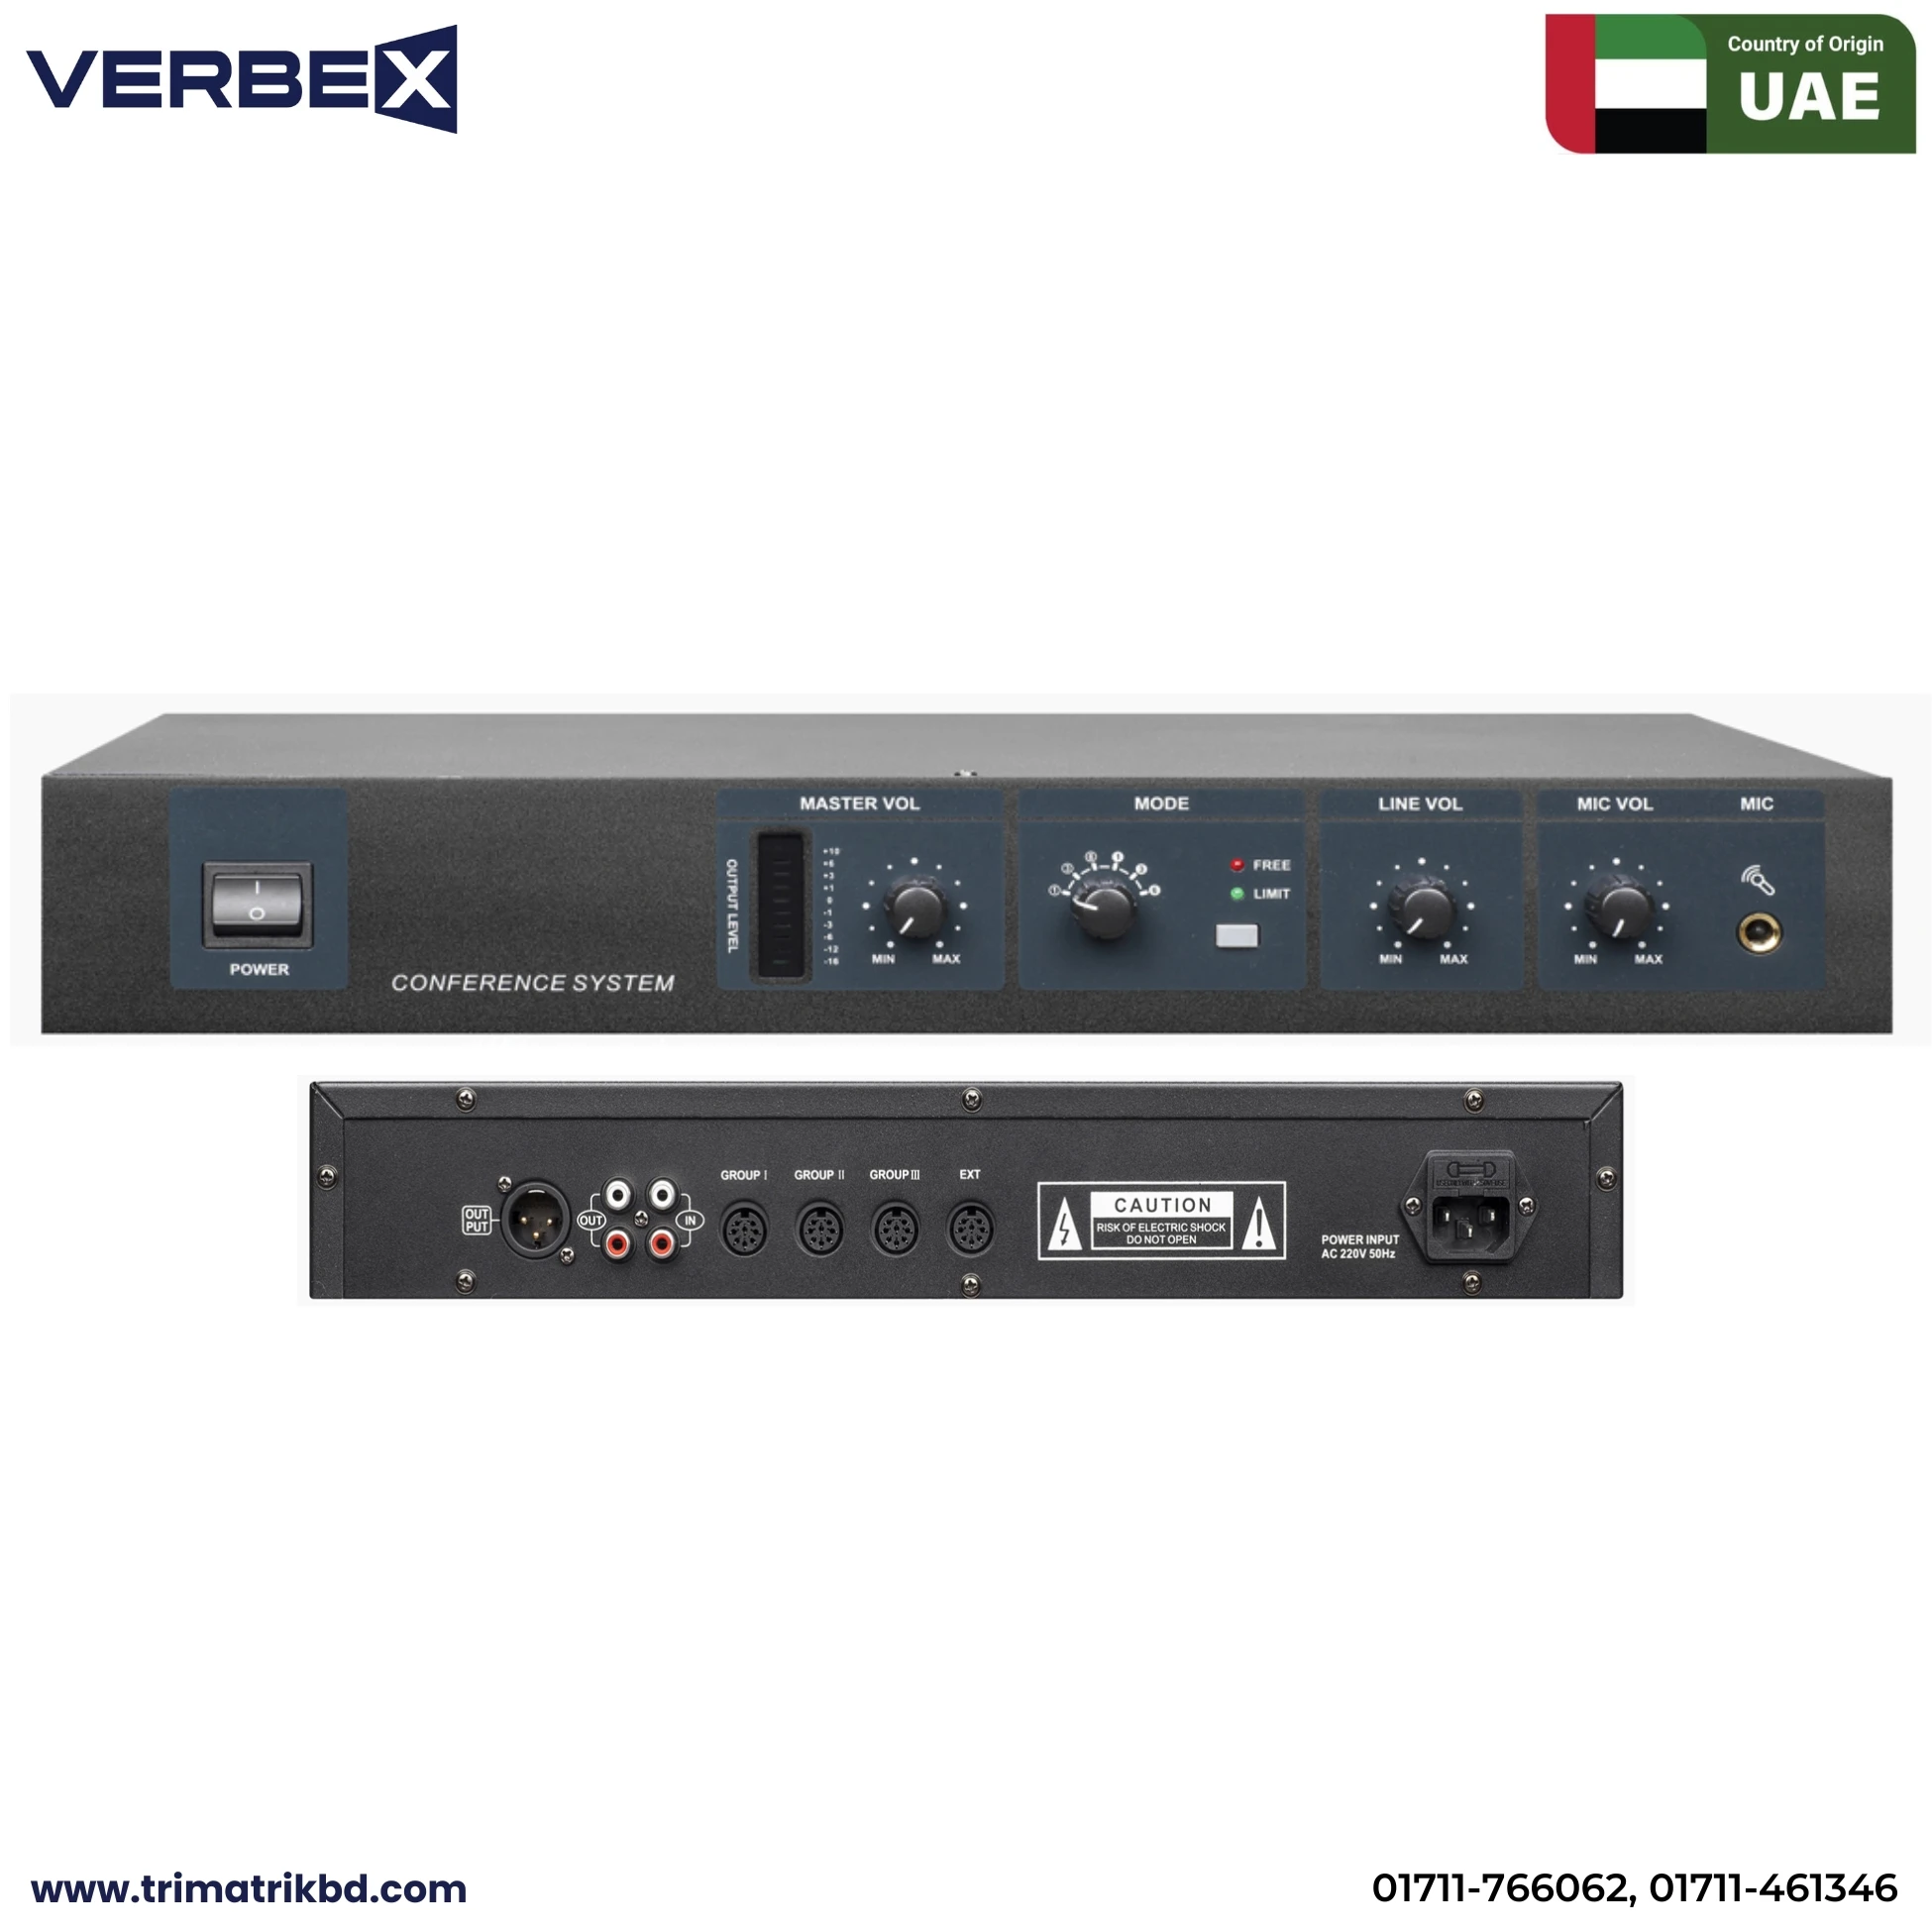 Verbex VT-8000 Series Conference Central Amplifier System